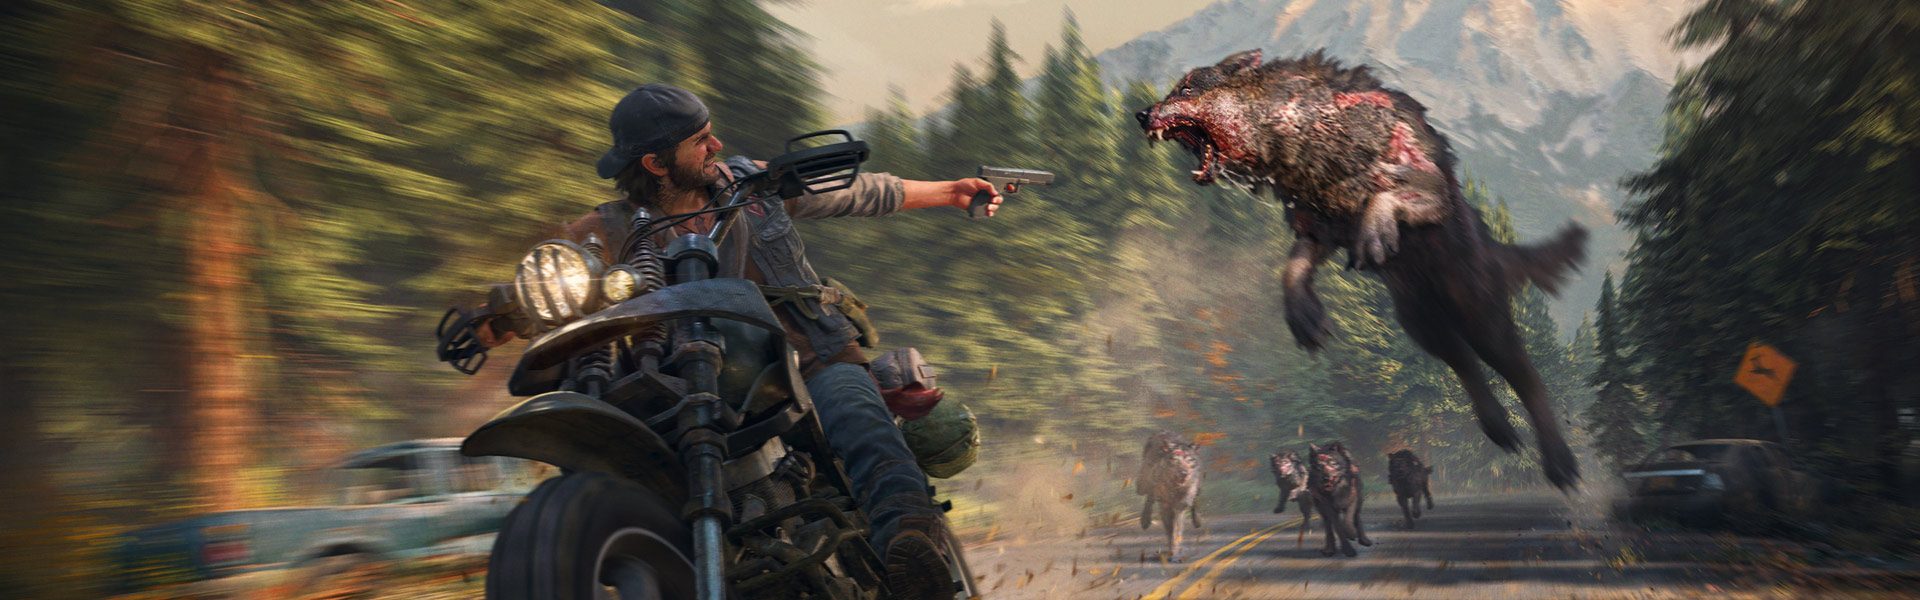 days gone ps4 sales